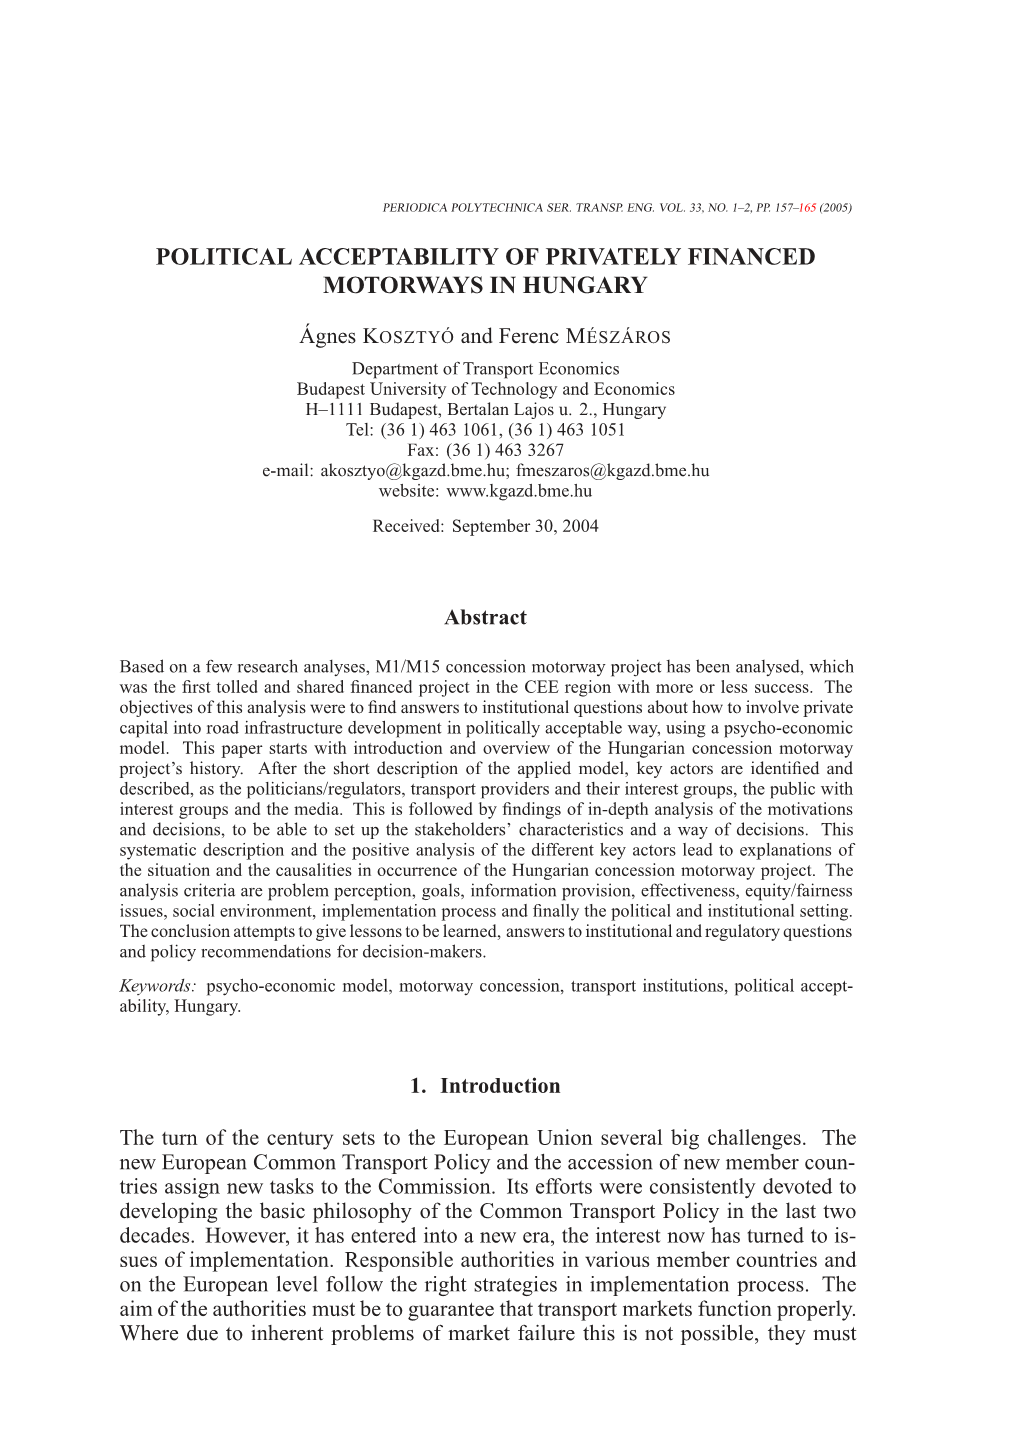 Political Acceptability of Privately Financed Motorways in Hungary